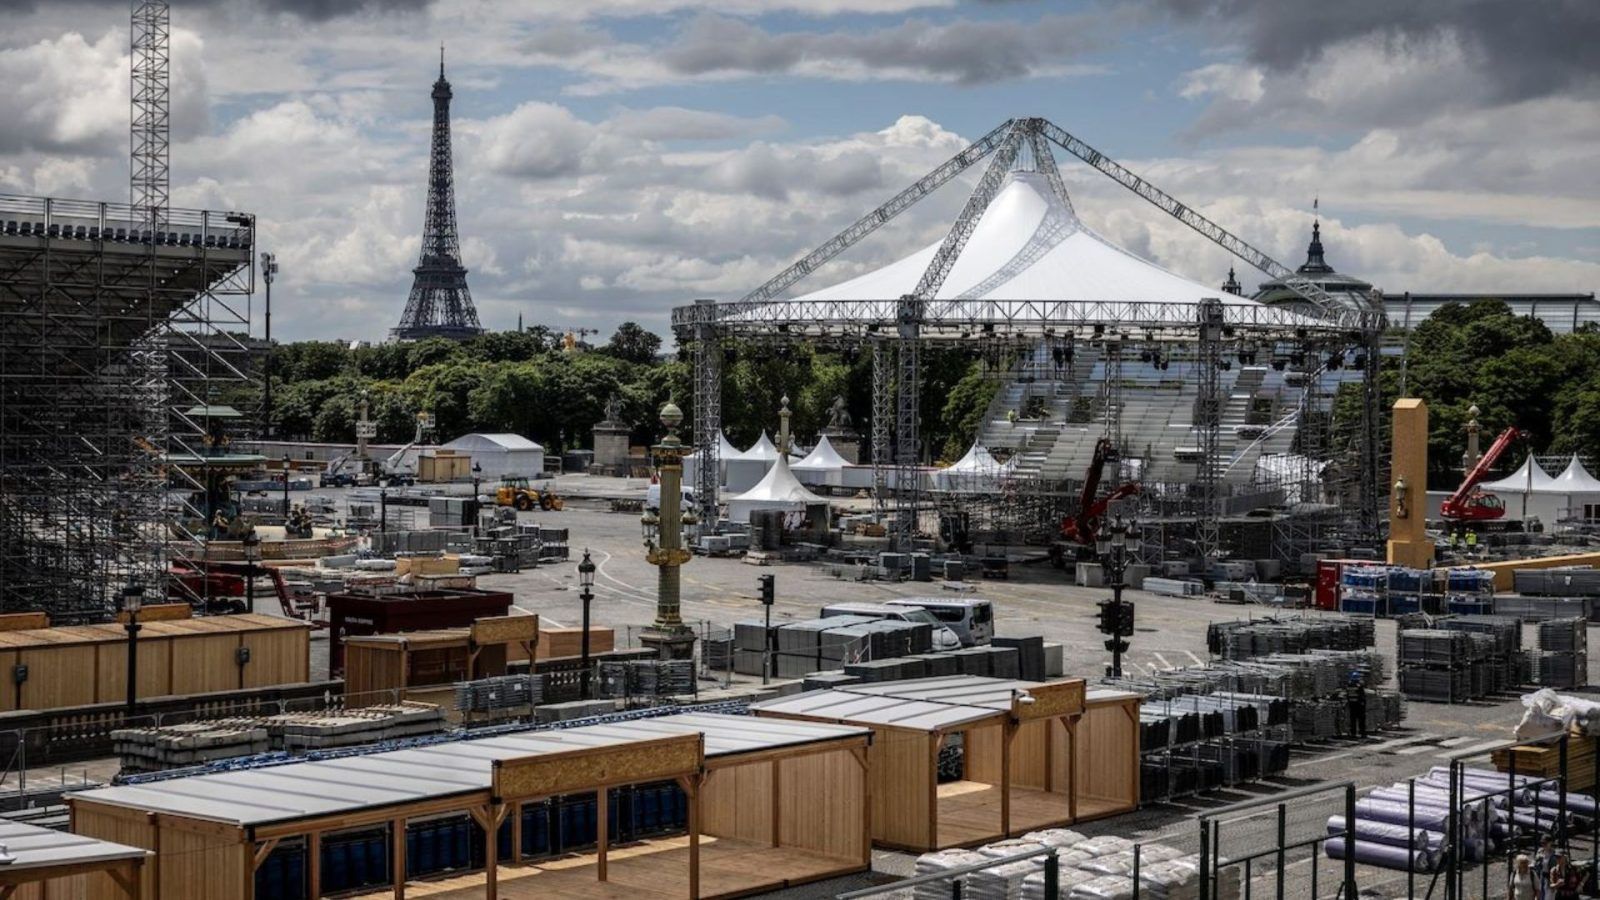 Check out the famous venues of the 2024 Paris Olympic Games